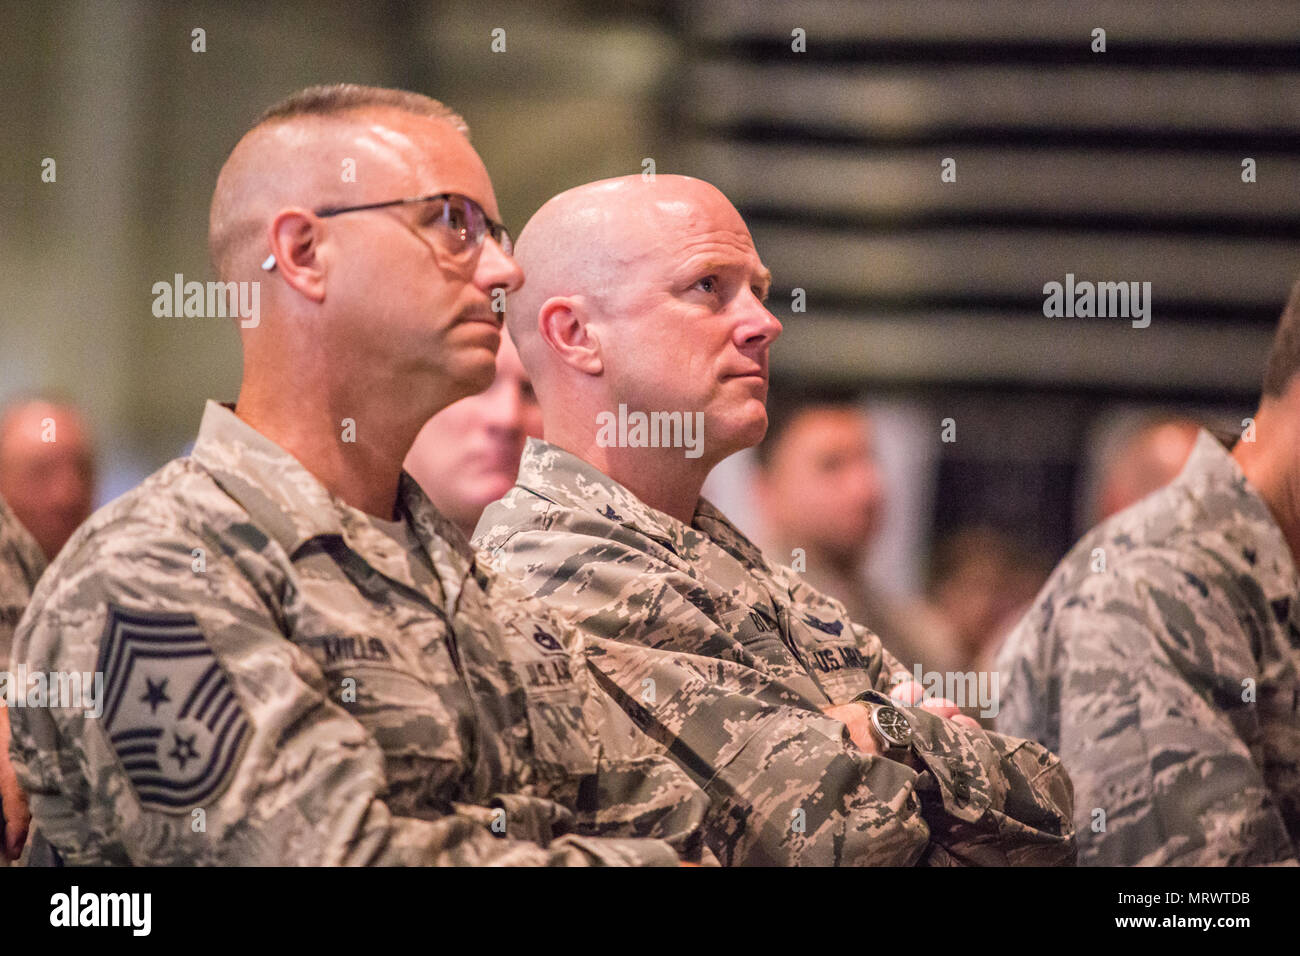 U.S. Air Force Chief Master Sgt. Randy Miller (left), command chief master sergeant of the 139th Airlift Wing (139th AW), Missouri Air National Guard, and Col. Ed Black, commander of the 139th AW listen as Lt. Gen. Scott Rice, director of the Air National Guard, and Chief Master Sgt. Ronald Anderson, command chief master sergeant of the Air National Guard, address Airmen at the St. Joseph Civic Arena, St. Joseph, Mo., July 8, 2017. Lt. Gen. Rice and Chief Master Sgt. Anderson, were in the process of visiting units across Missouri. While in St. Joseph, they toured Rosecrans Air National Guard B Stock Photo